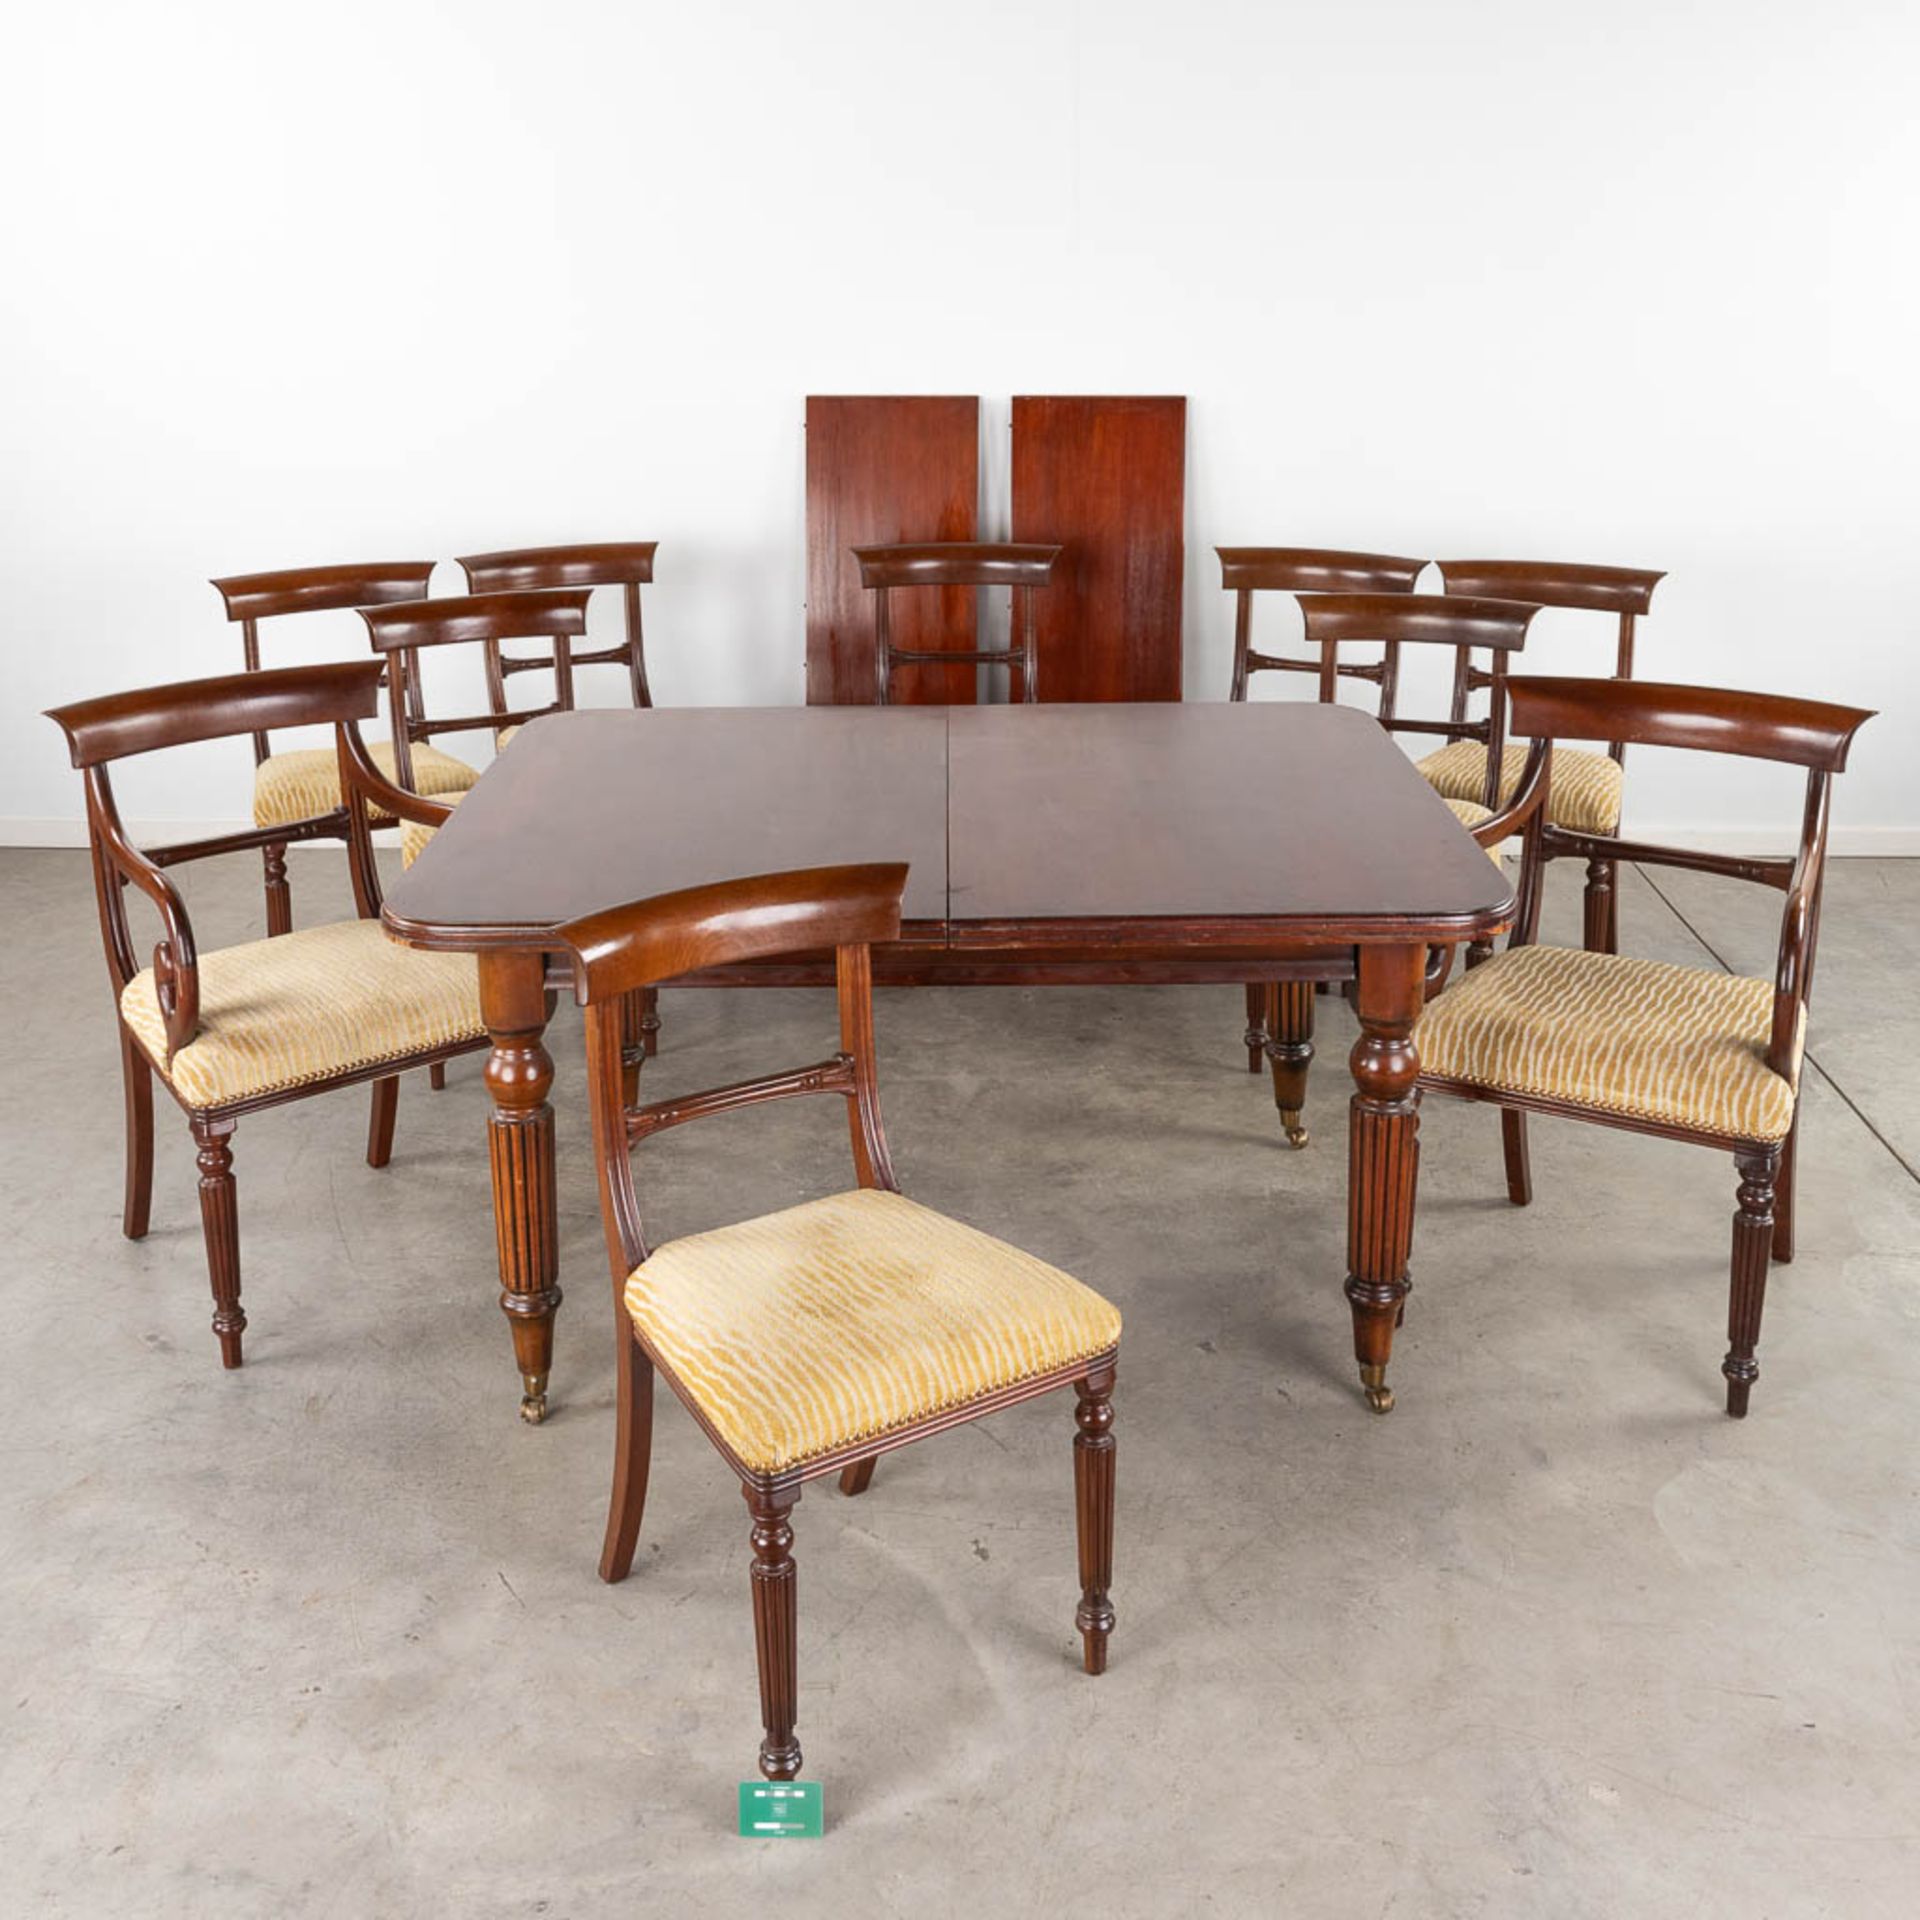 An extendible table, 6 chairs and two armchairs, Mahogany. England. 20th C. (D:144 x W:144 x H:75 cm - Image 2 of 22